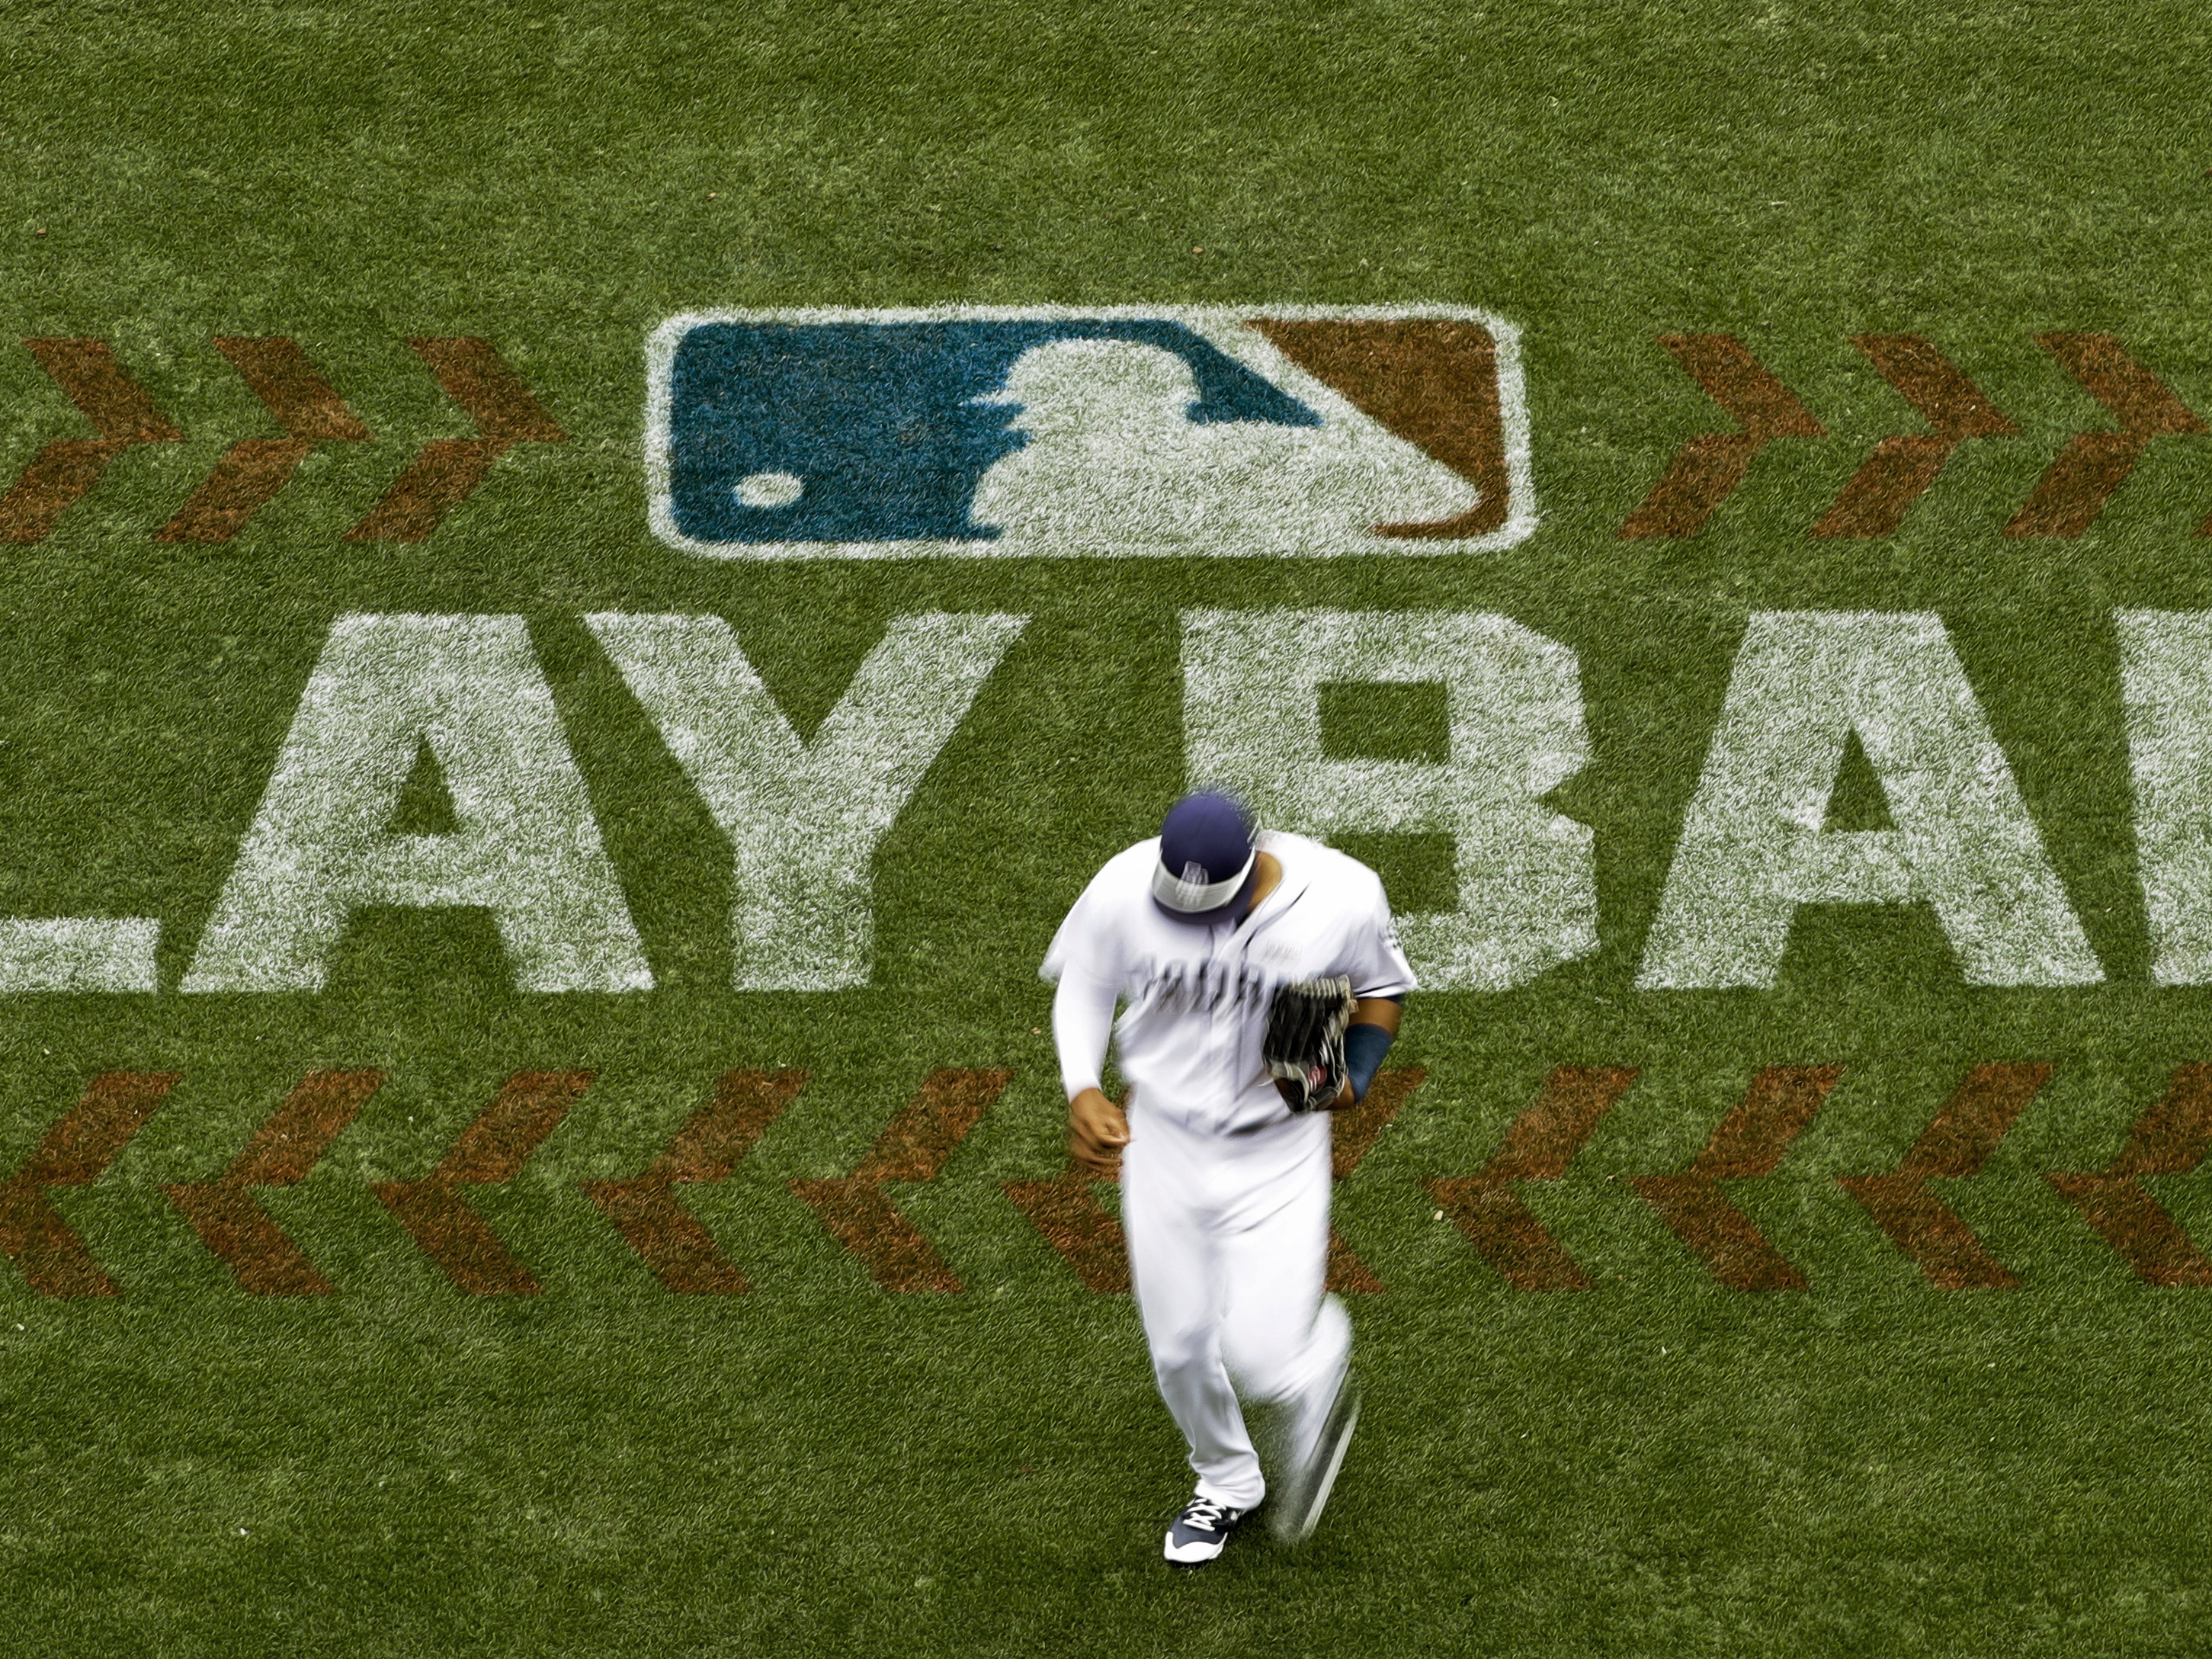 MLB owners lock out players, 1st work stoppage since 1995